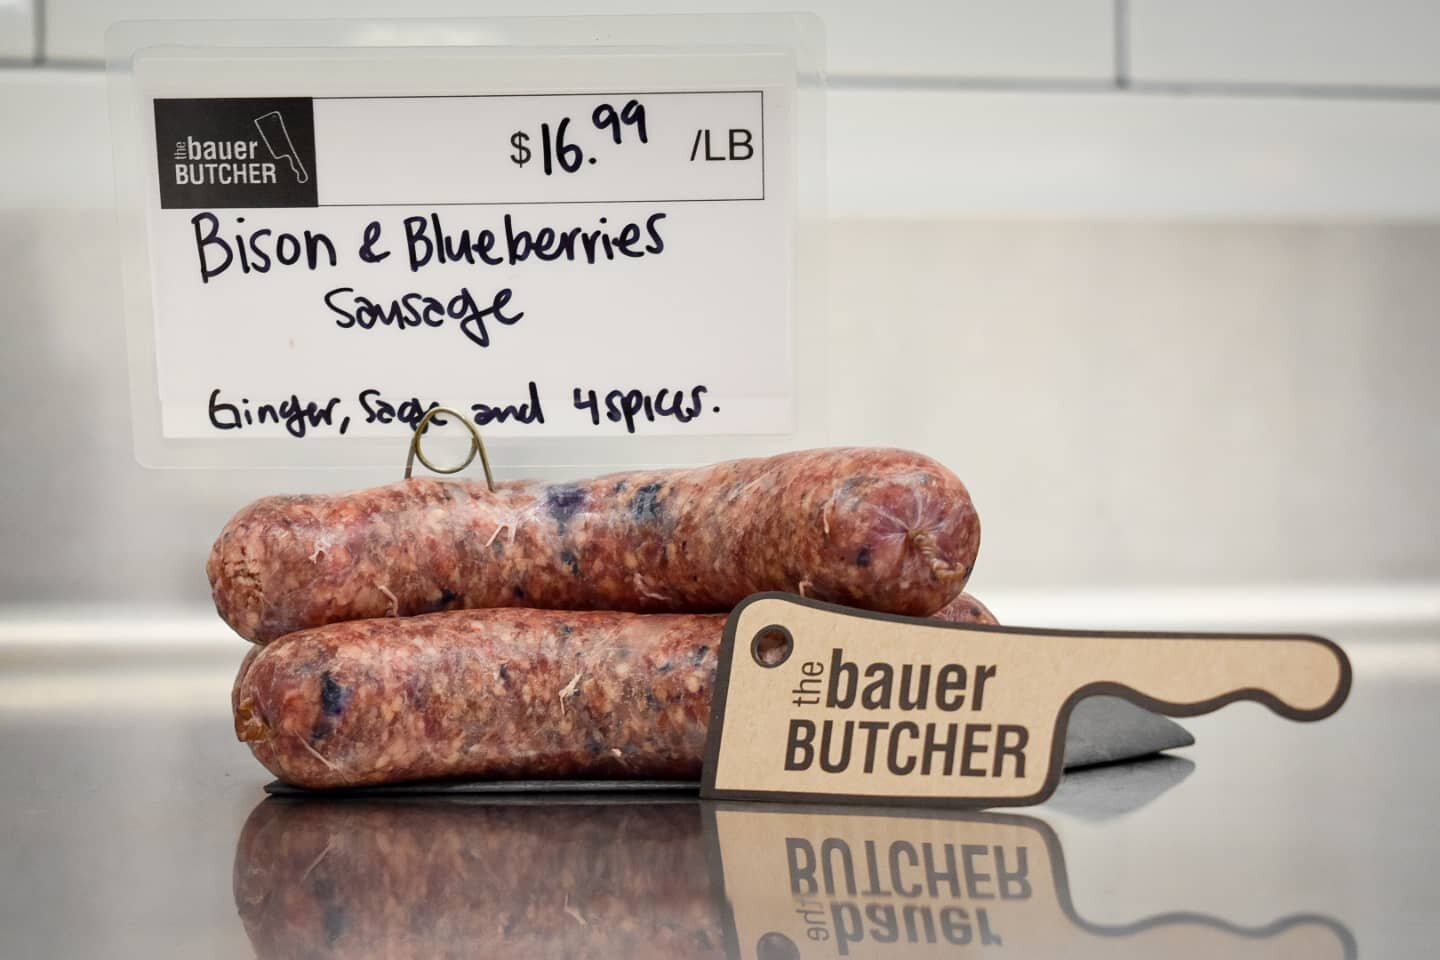 In case you missed it, one of our feature sausages this week is Bison with blueberries.  Available now, but they won't last long!